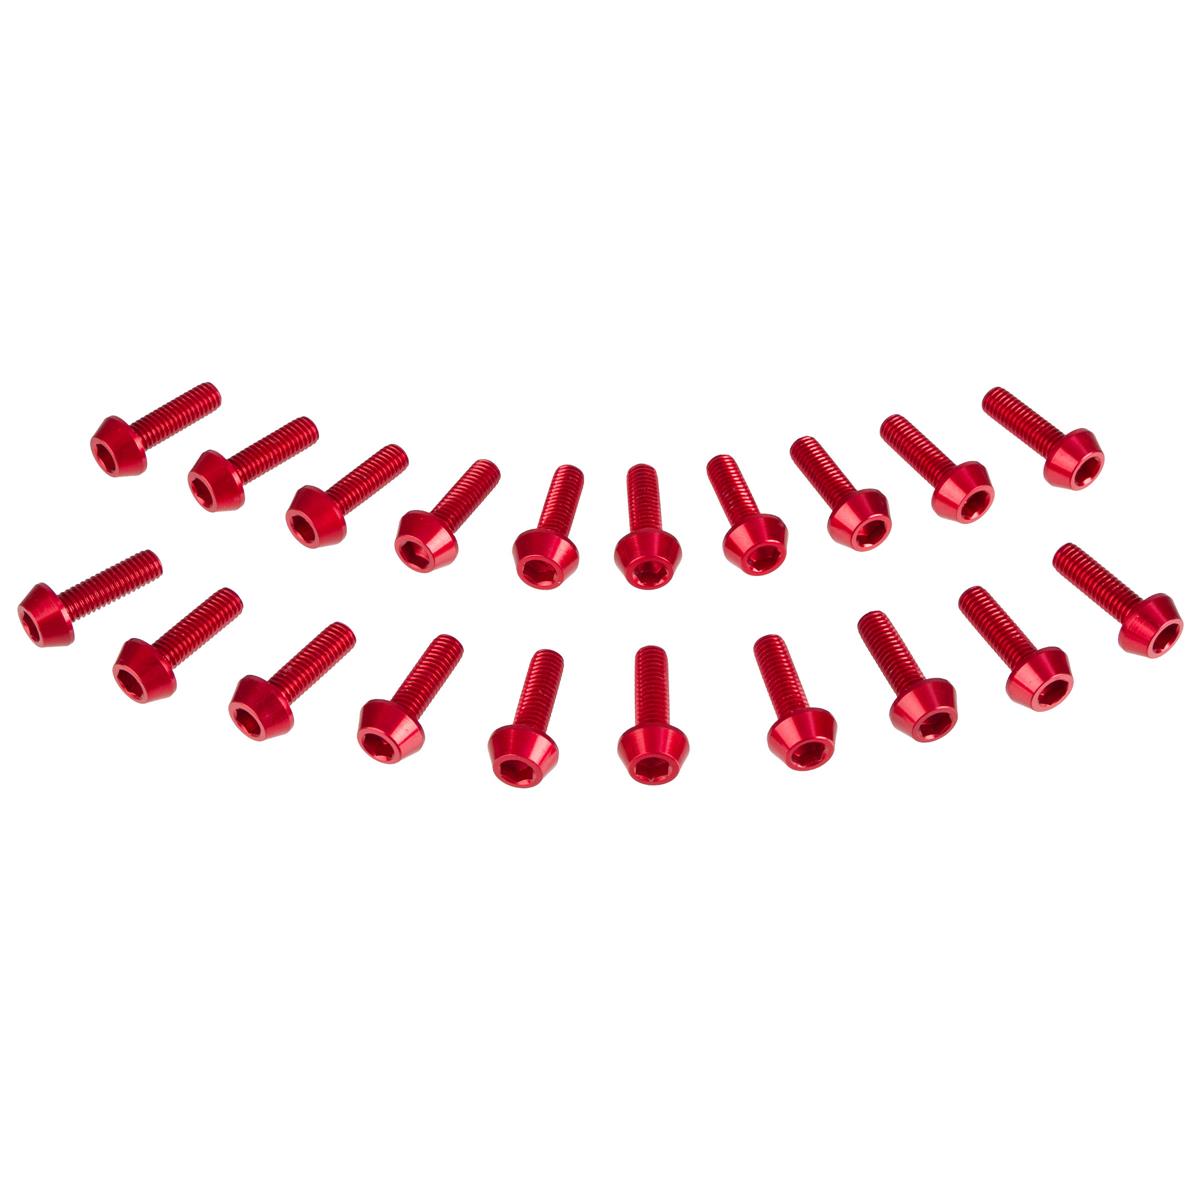 DRC Inner Hex Bolts  M6 x 20 mm, Red, 20 Pack